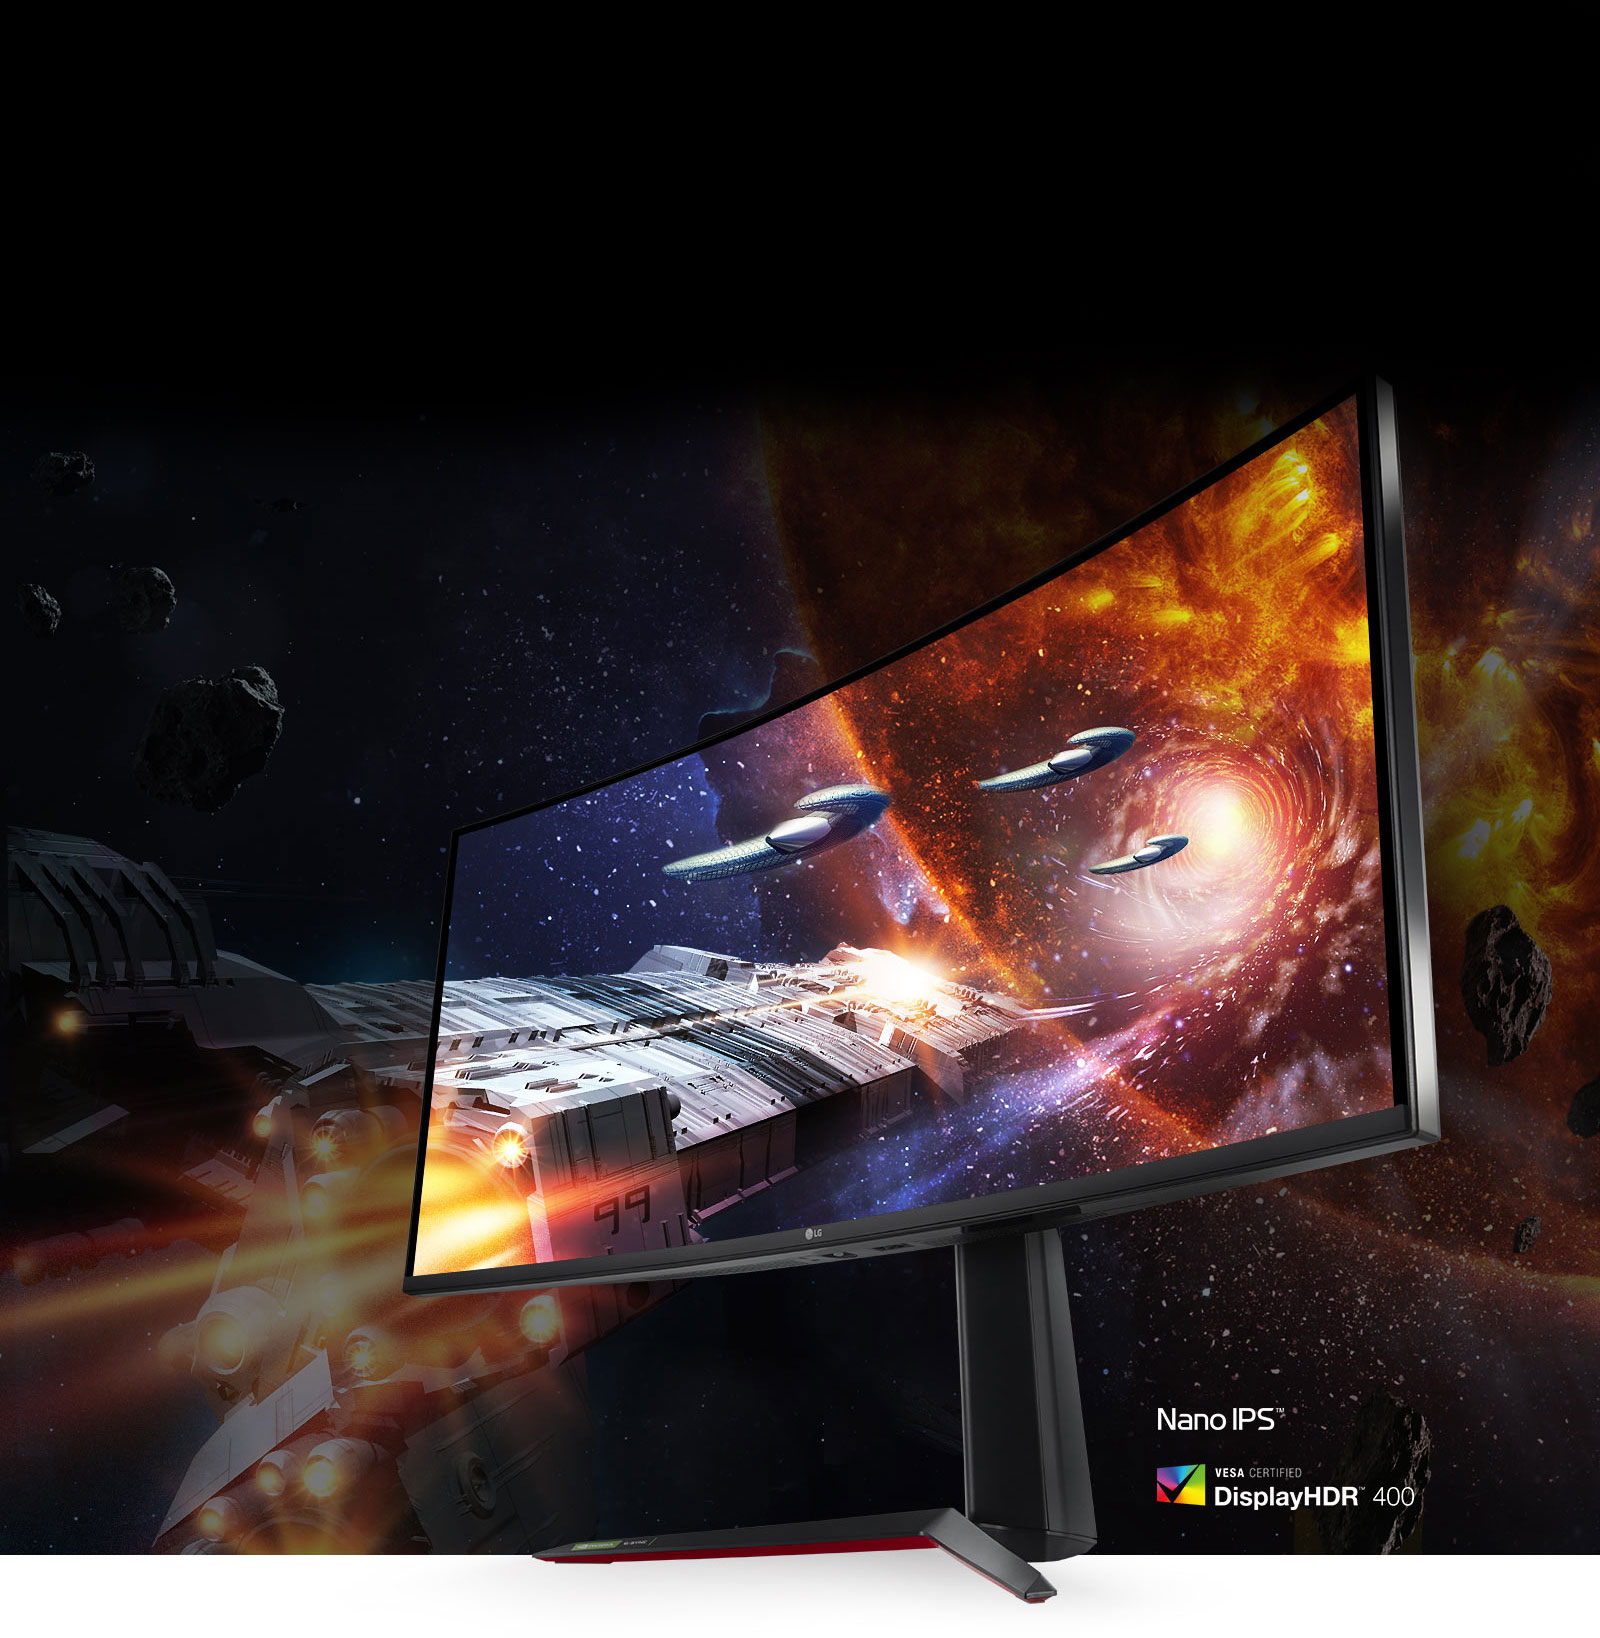 the monitor with a universe image as screen